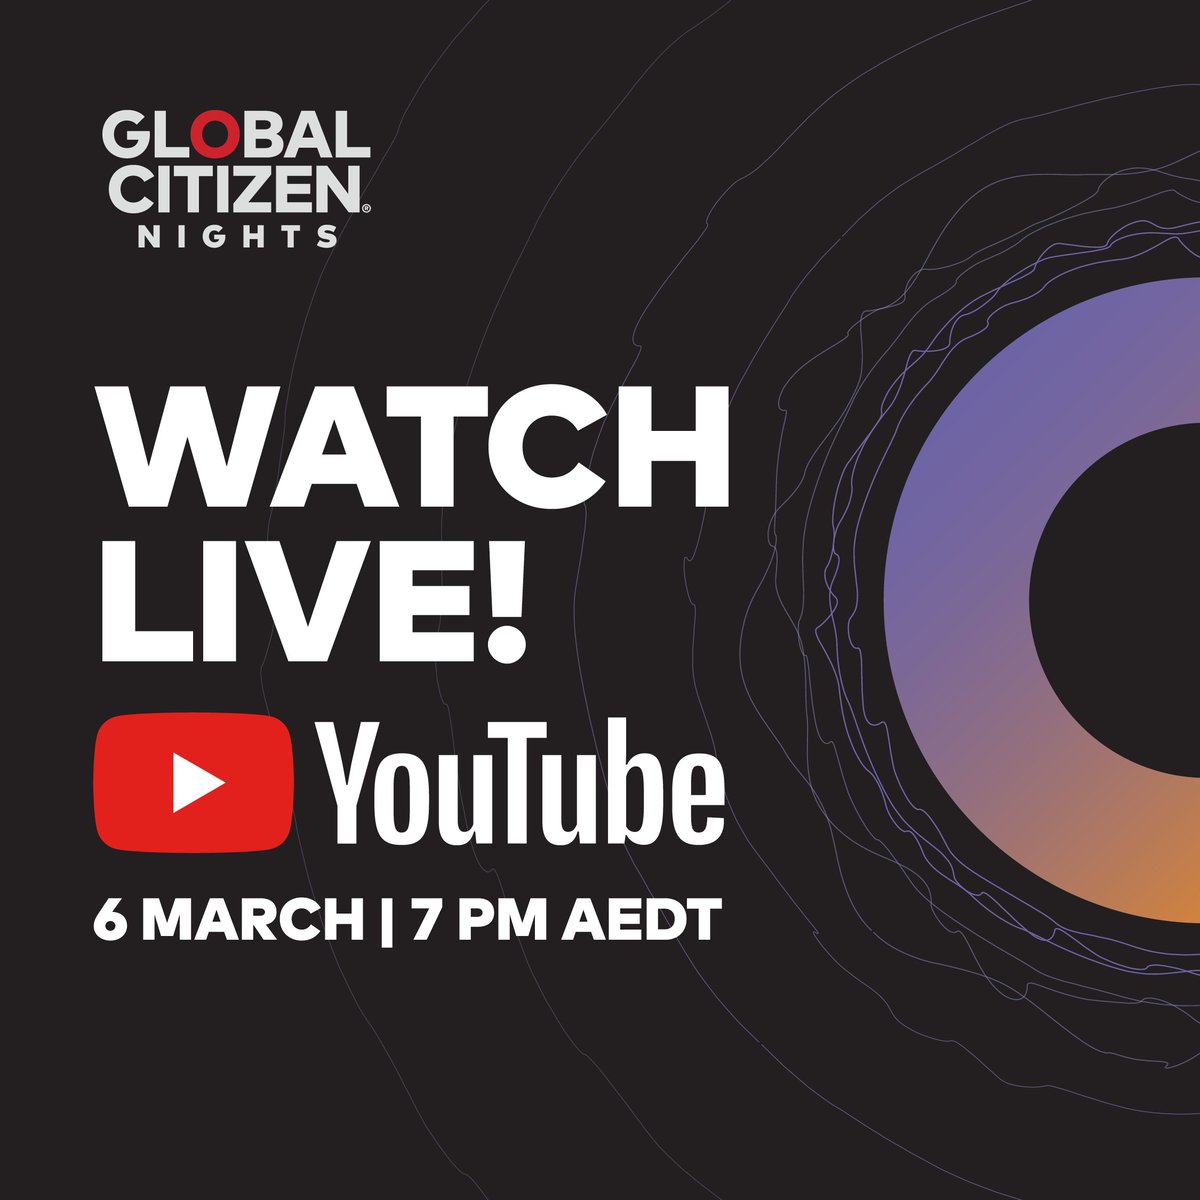 Can’t make it to #GlobalCitizenNights? Good news: you can tune in LIVE on YouTube! The show starts at 7 pm AEDT, so get that alarm set ⏰ and make sure you tune in 👇 youtube.com/live/Xkn7_S5uv…